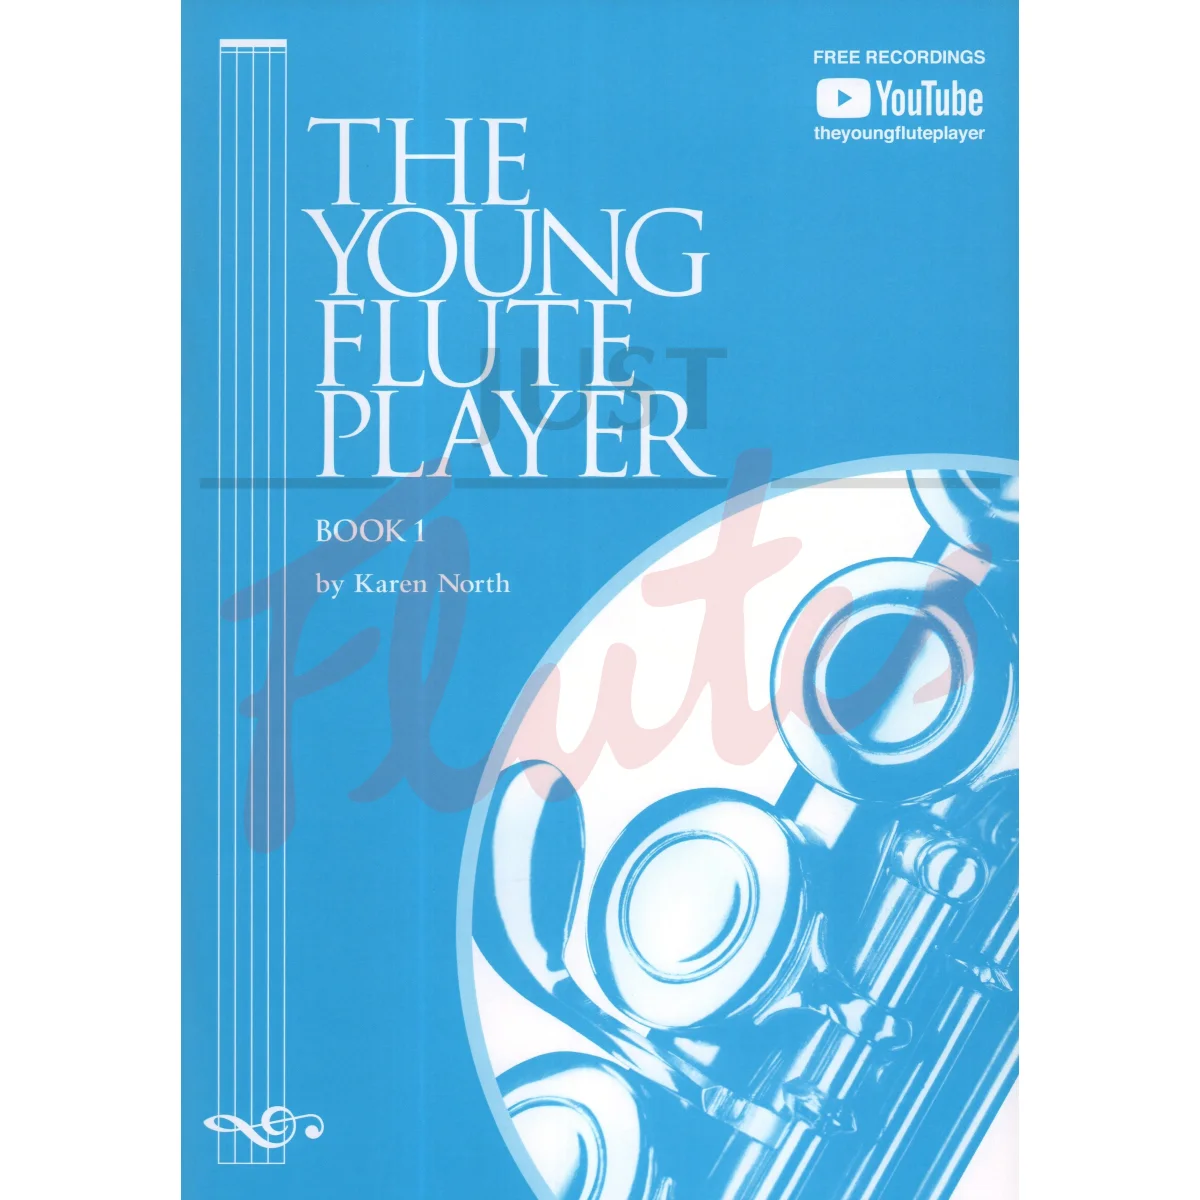 The Young Flute Player Book 1